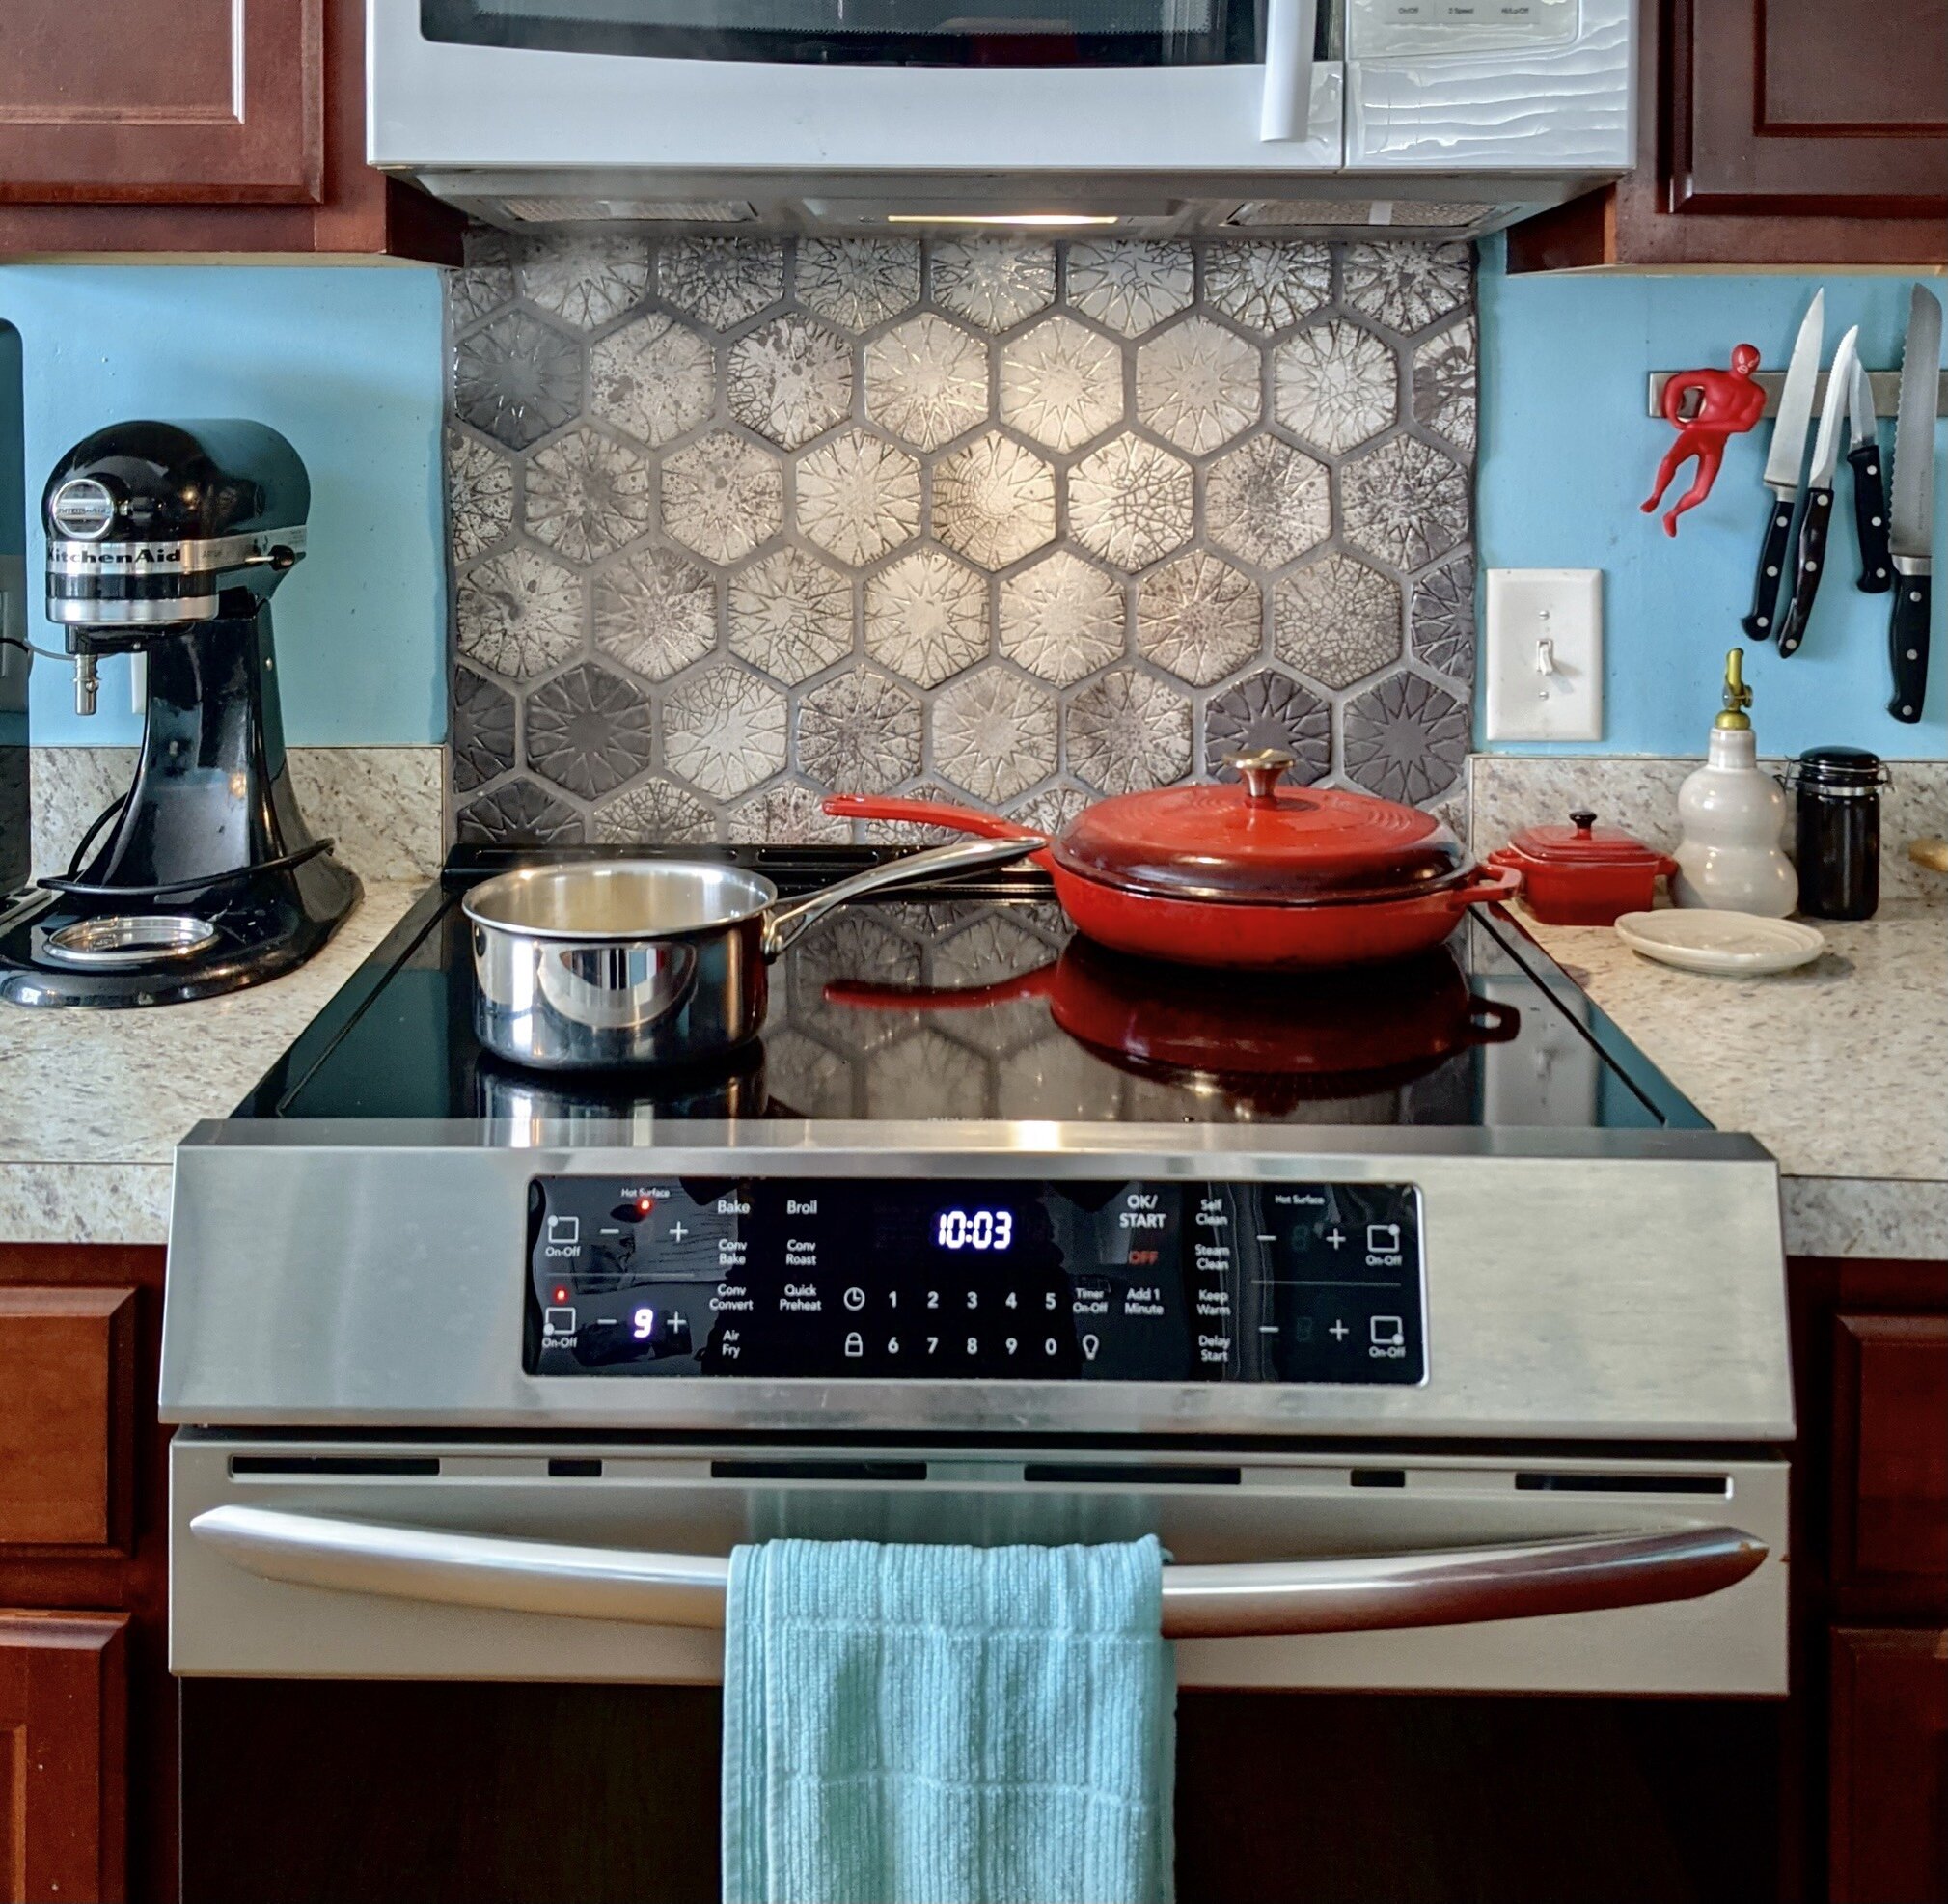 How to install kitchen backsplash tile using adhesive mat instead of  thin-set mortar.